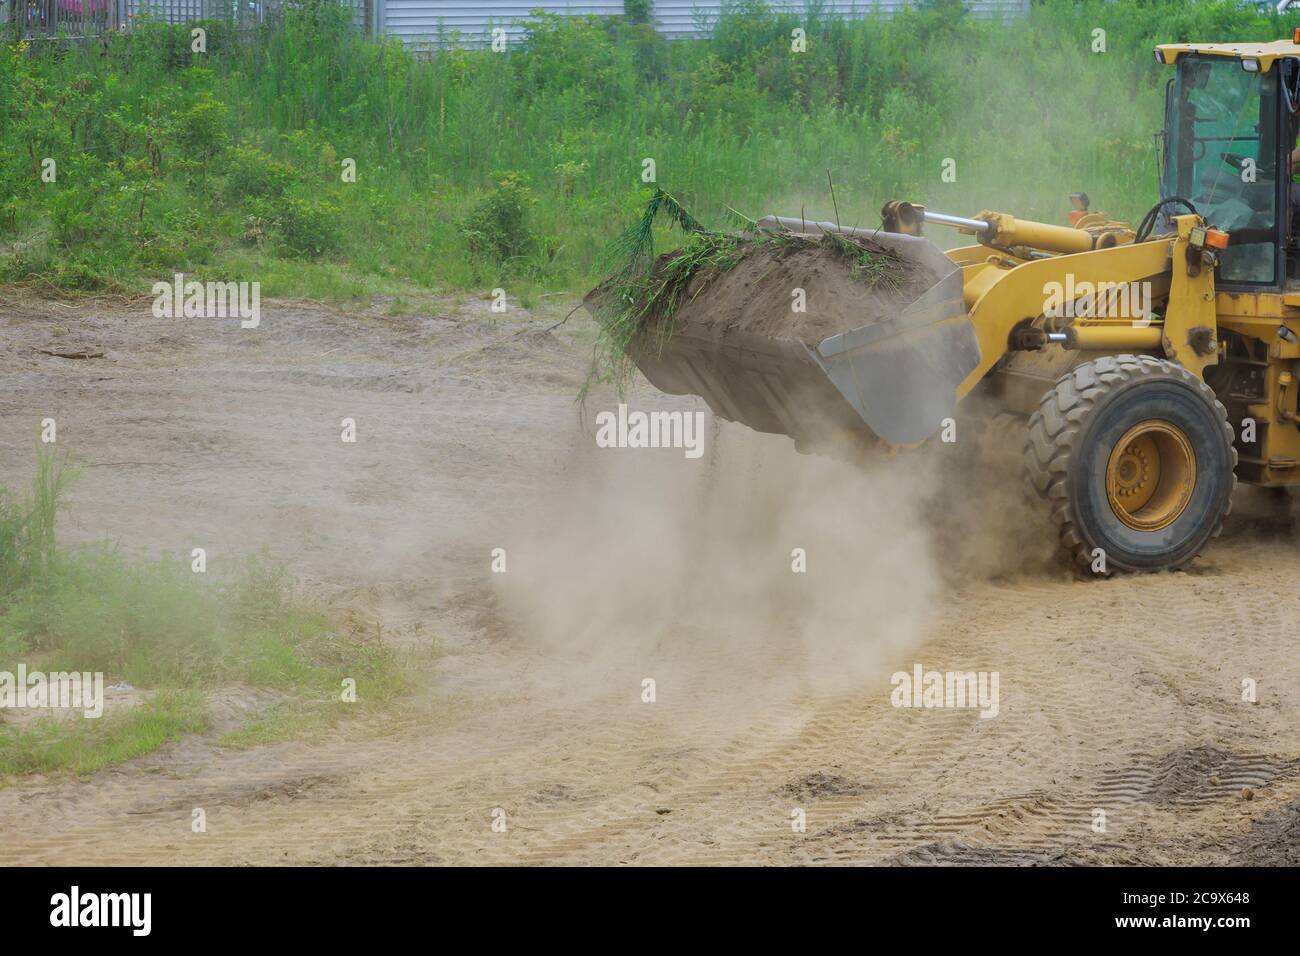 Bulldozer moving, leveling ground at construction site in ground using shovels Stock Photo